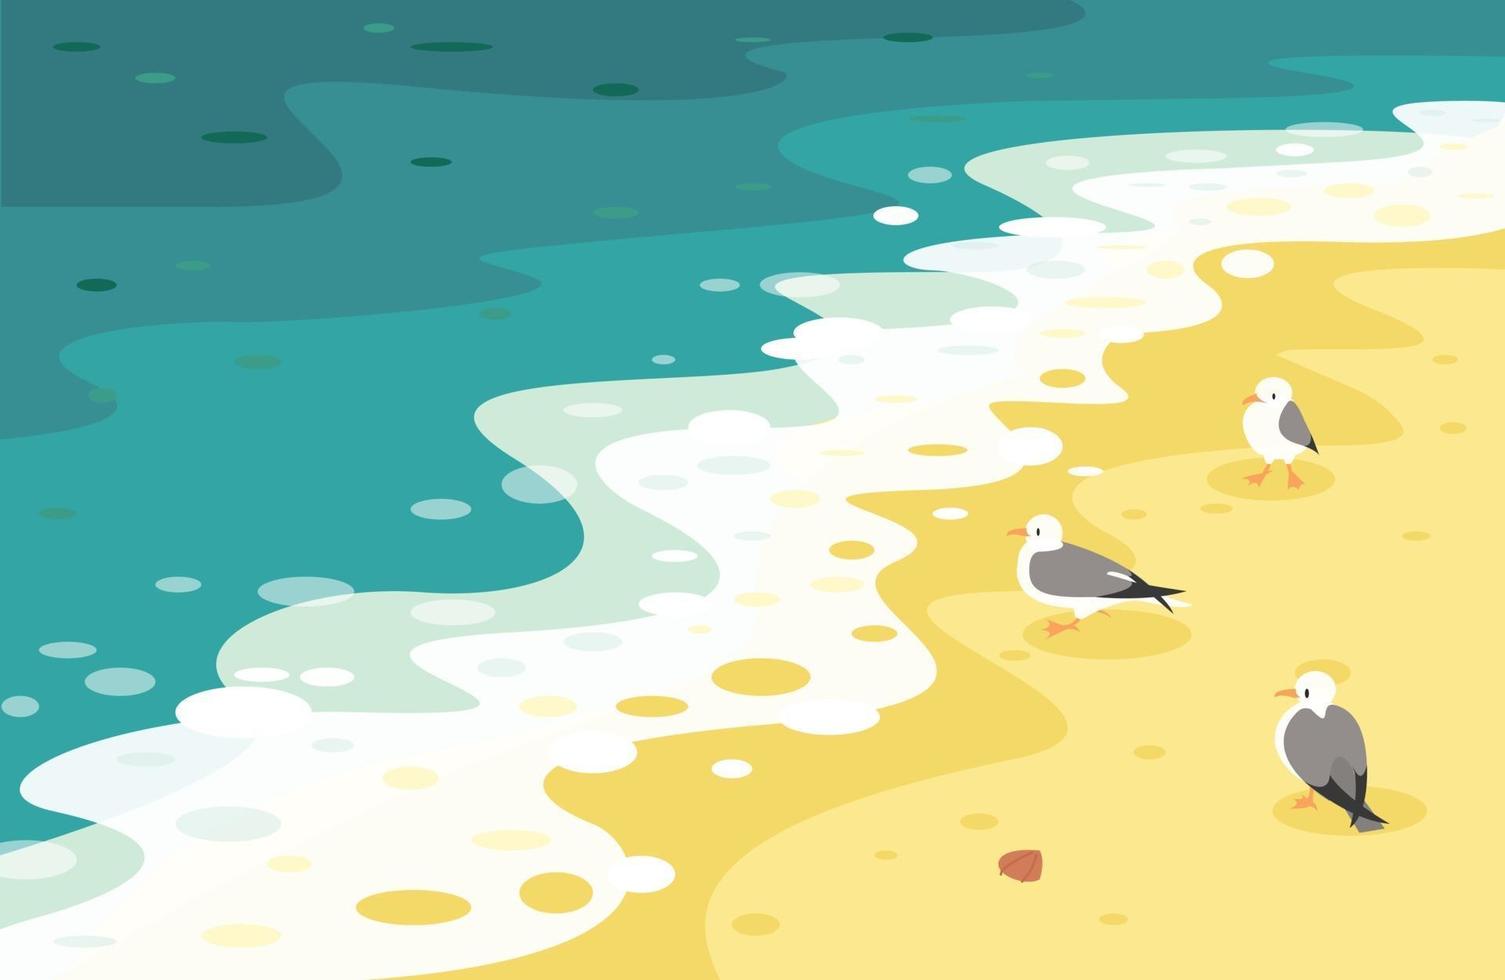 Seagulls on the beach hit by the waves. hand drawn style vector design illustrations.